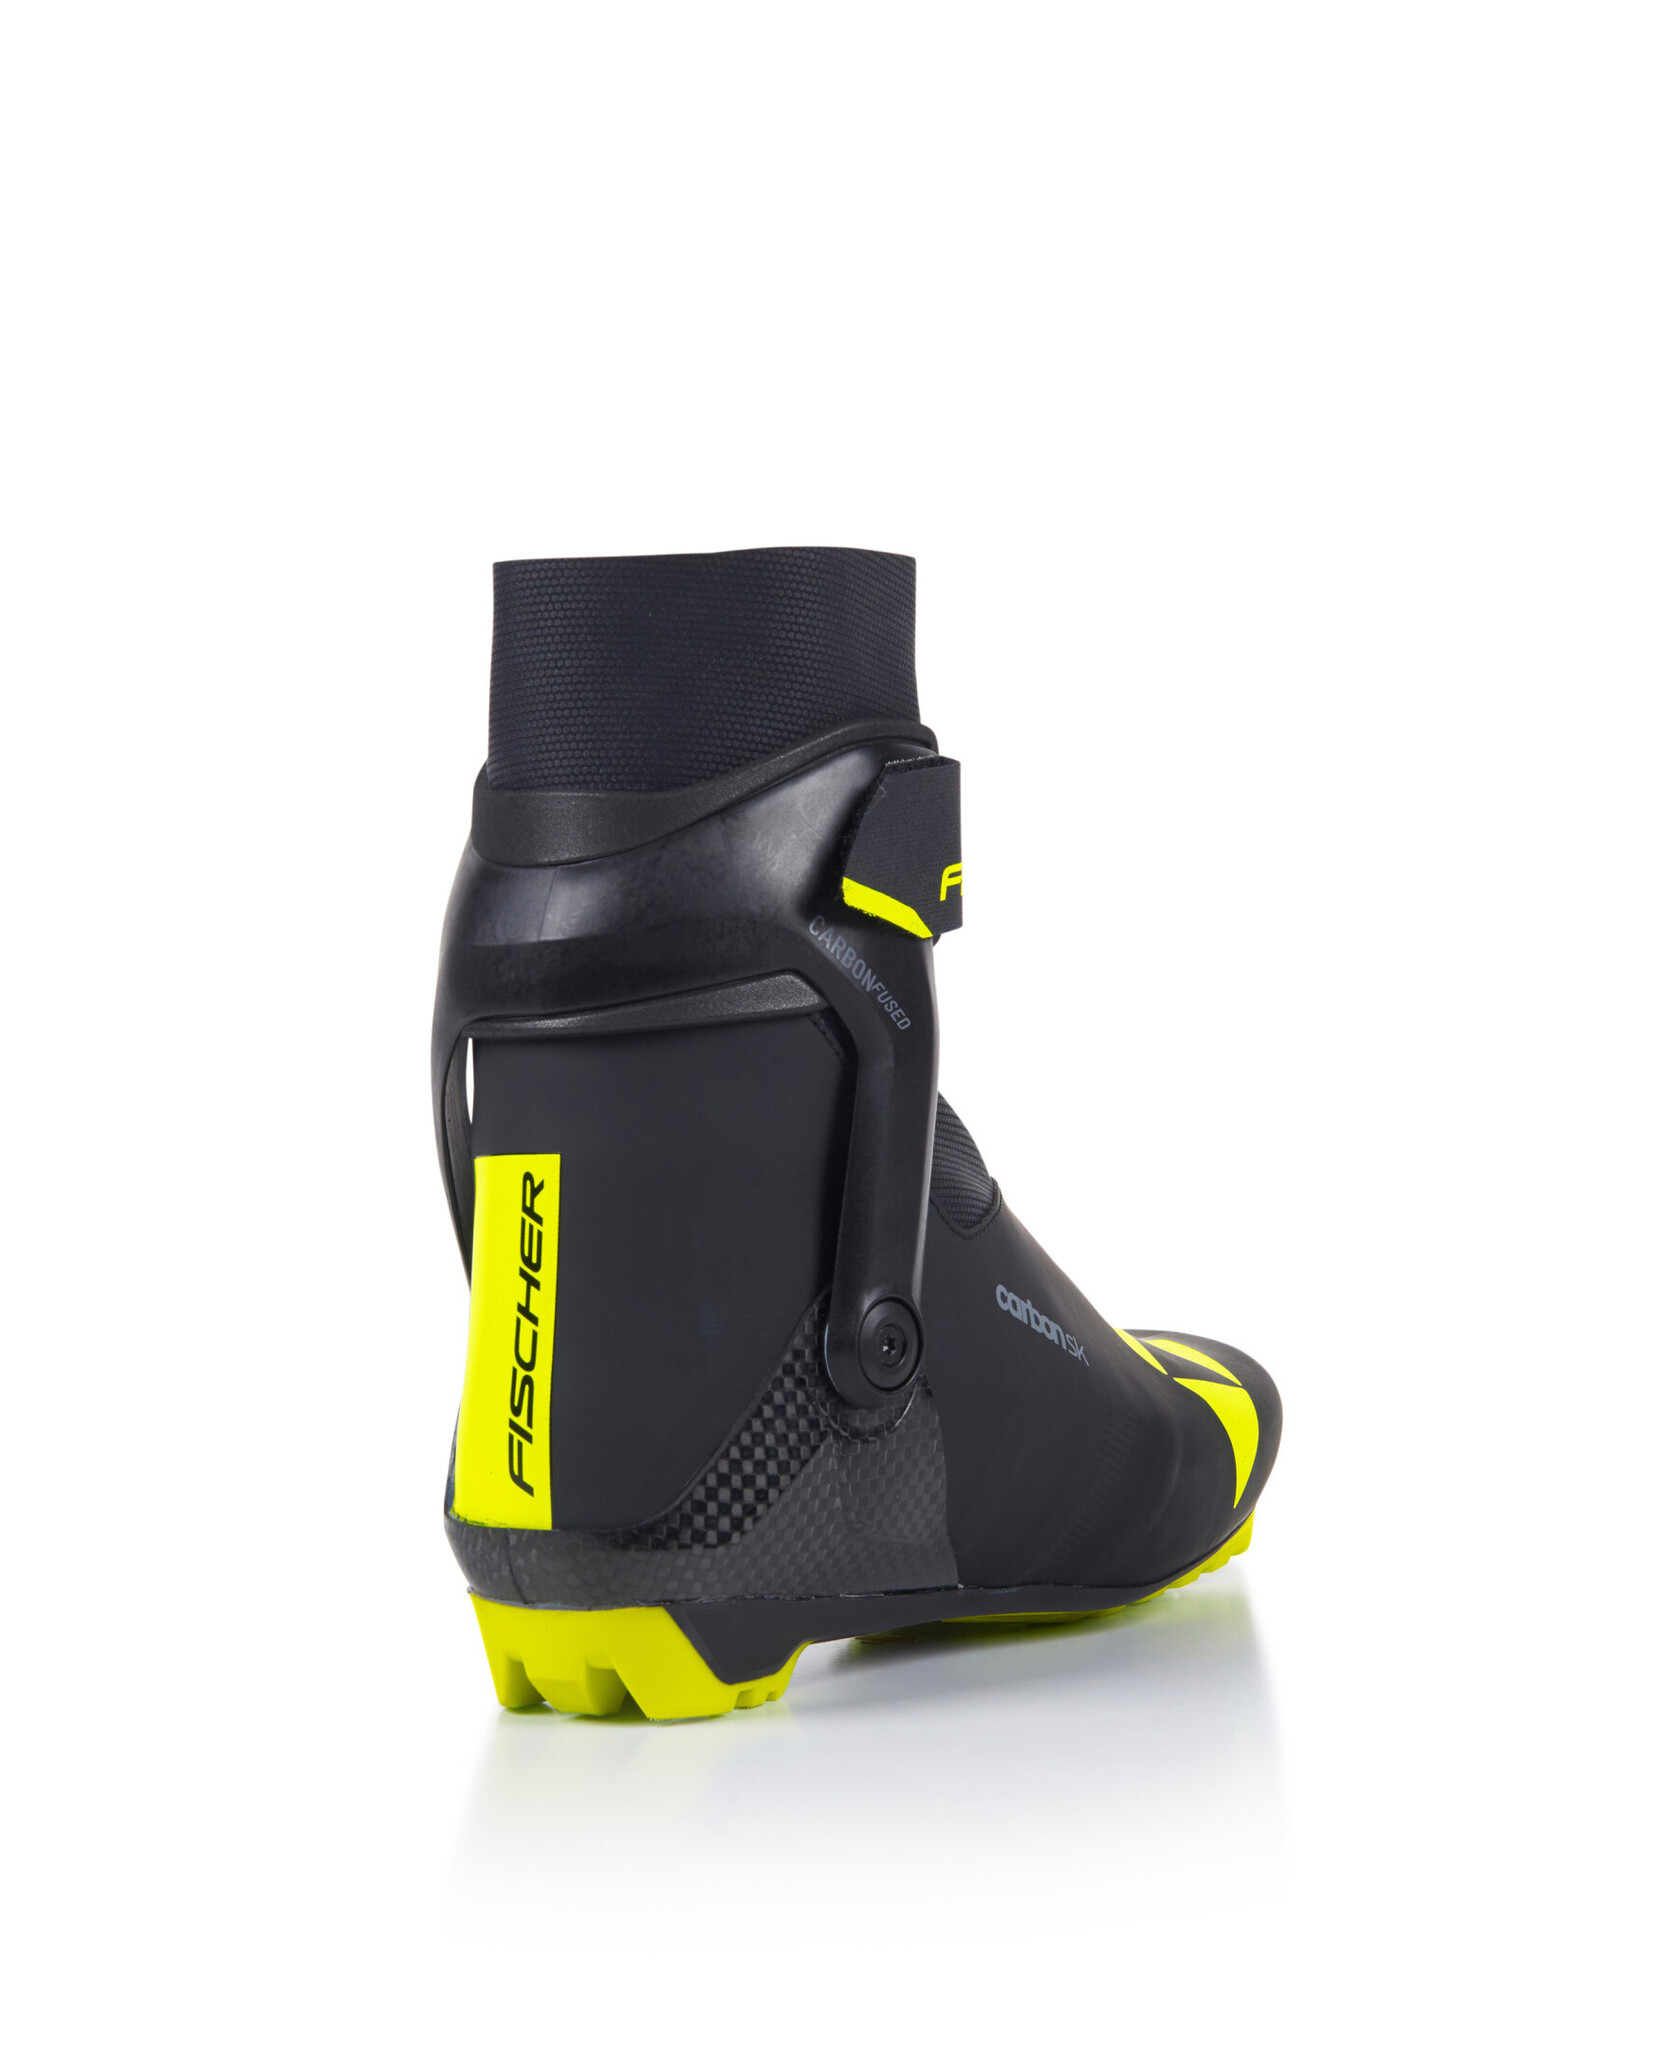 Couvre-bottes Fischer Bootcover Race 2020 - Demers bicyclettes et